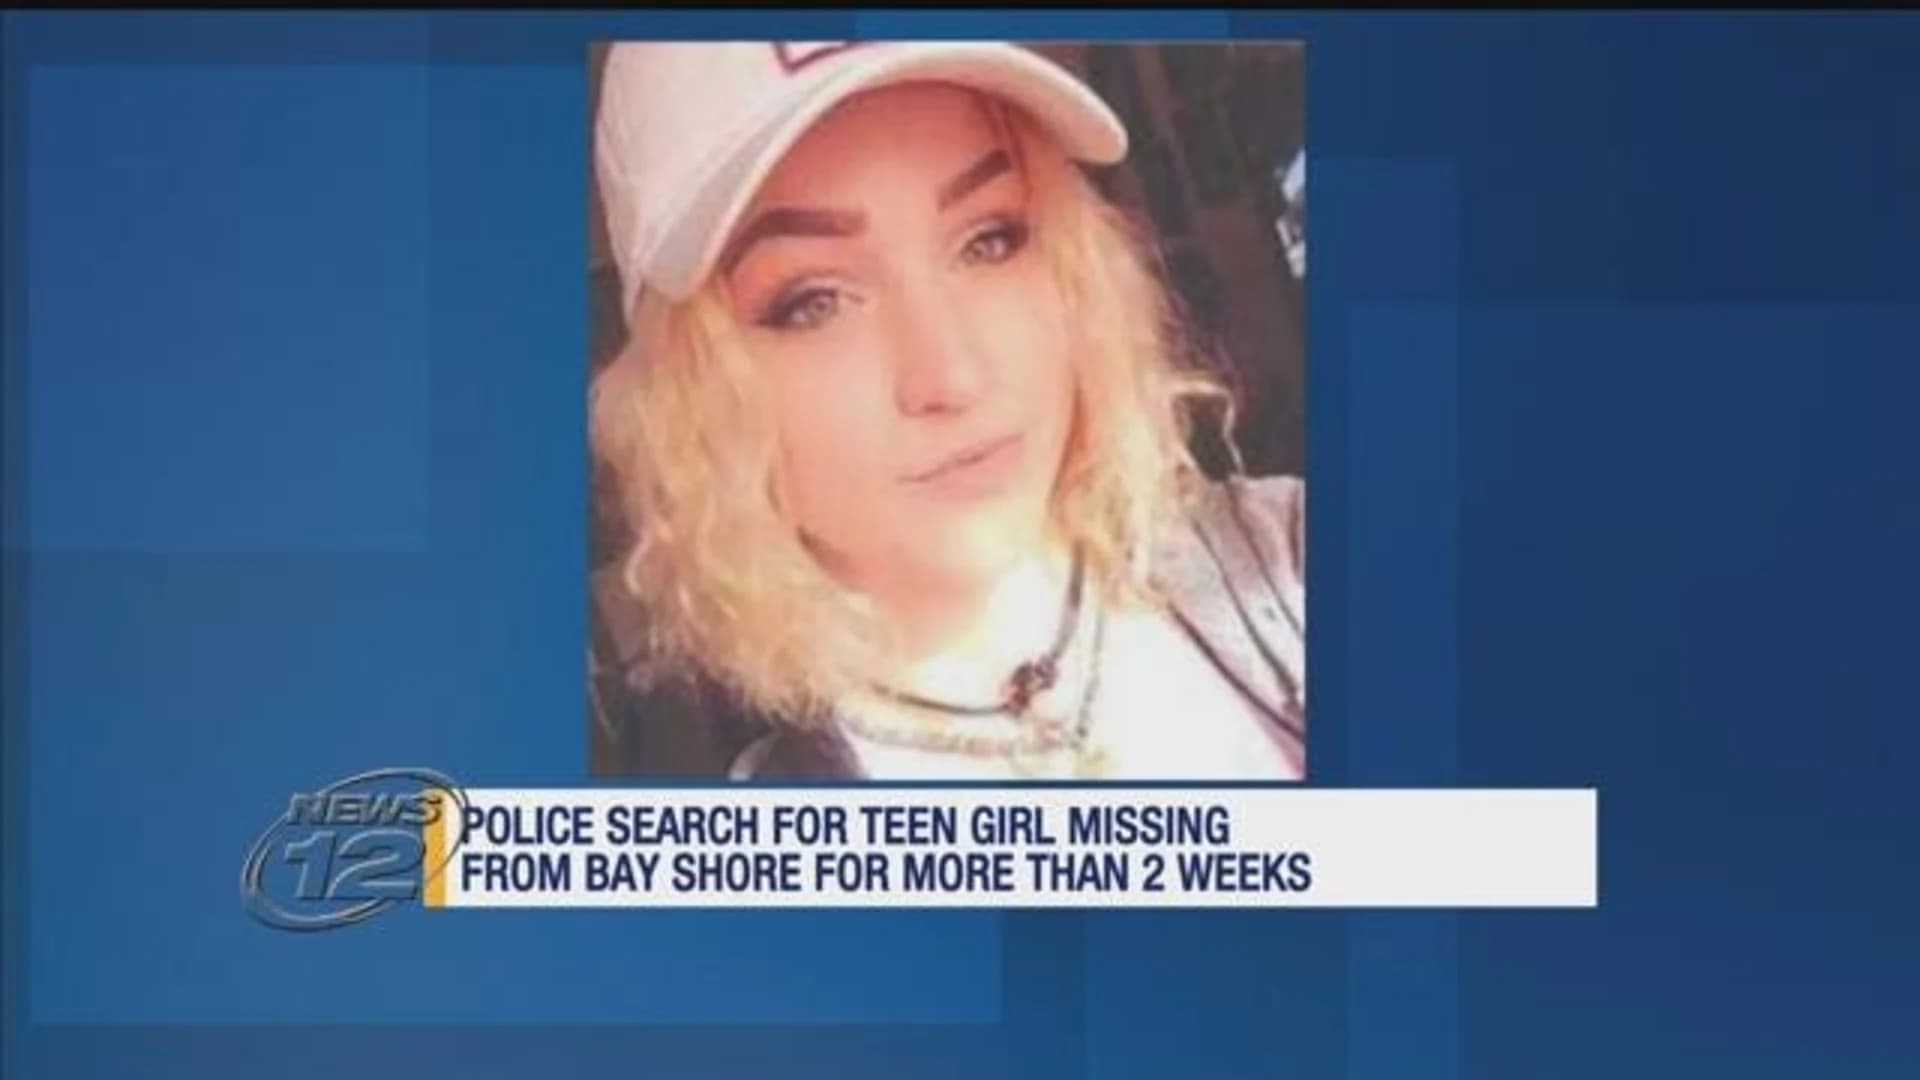 Police search for missing Bay Shore teen